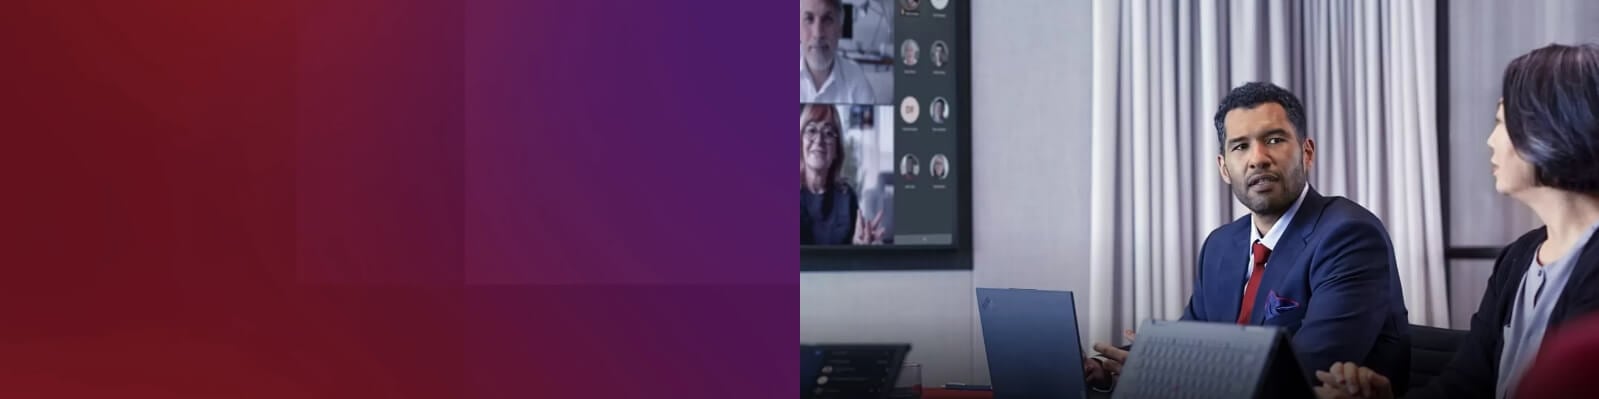 Man and woman in conference room having a virtual meeting